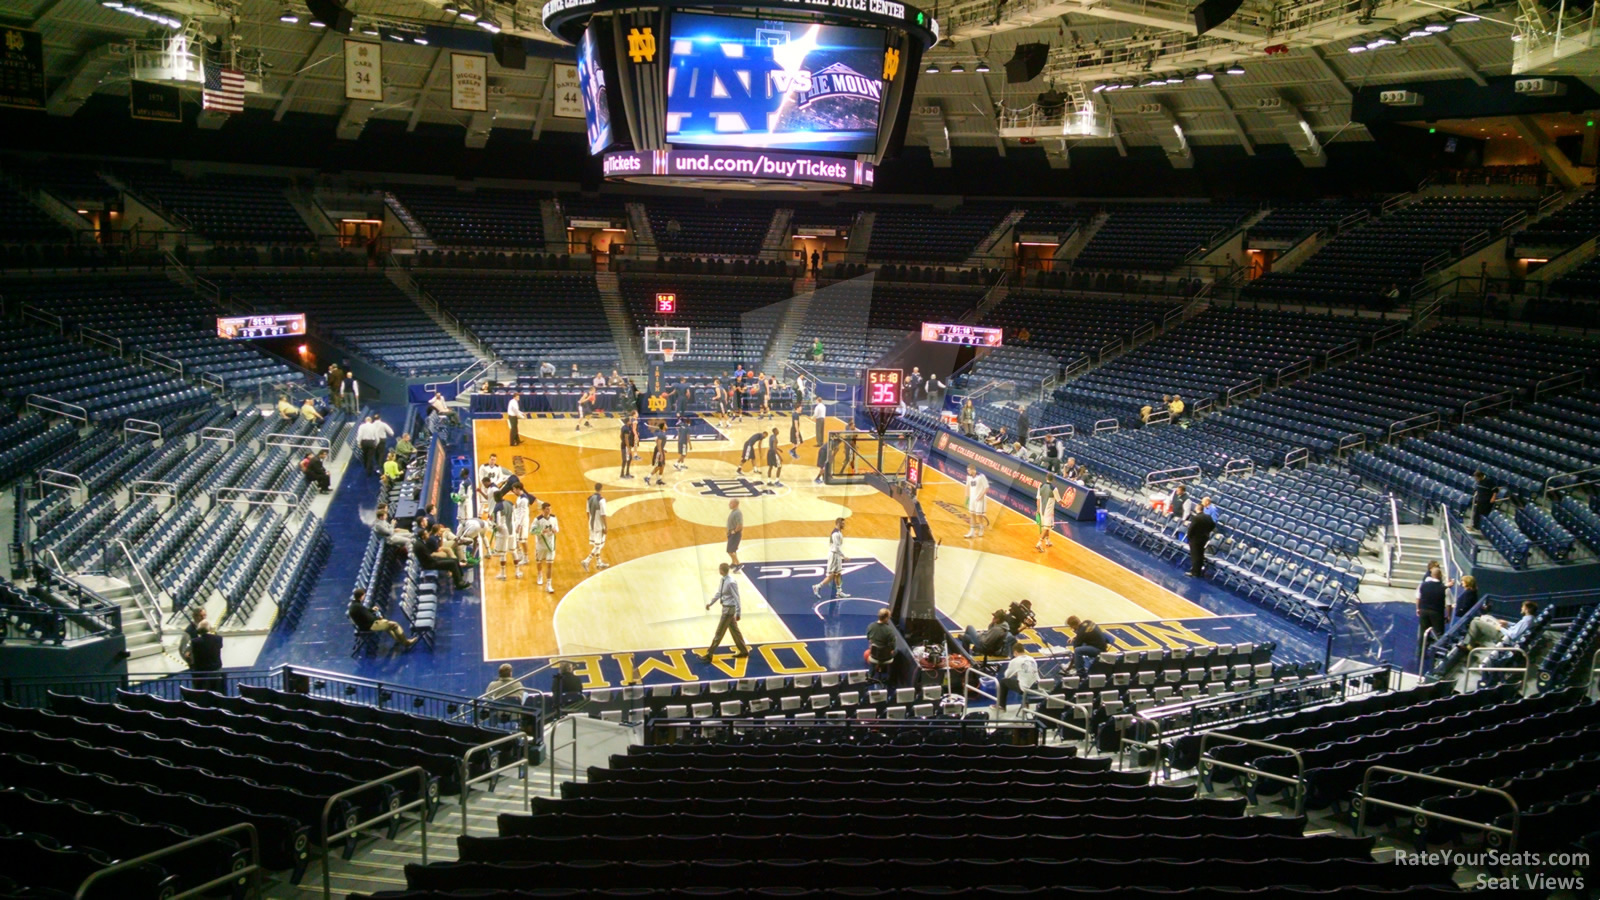 section 106, row 3 seat view  - joyce center